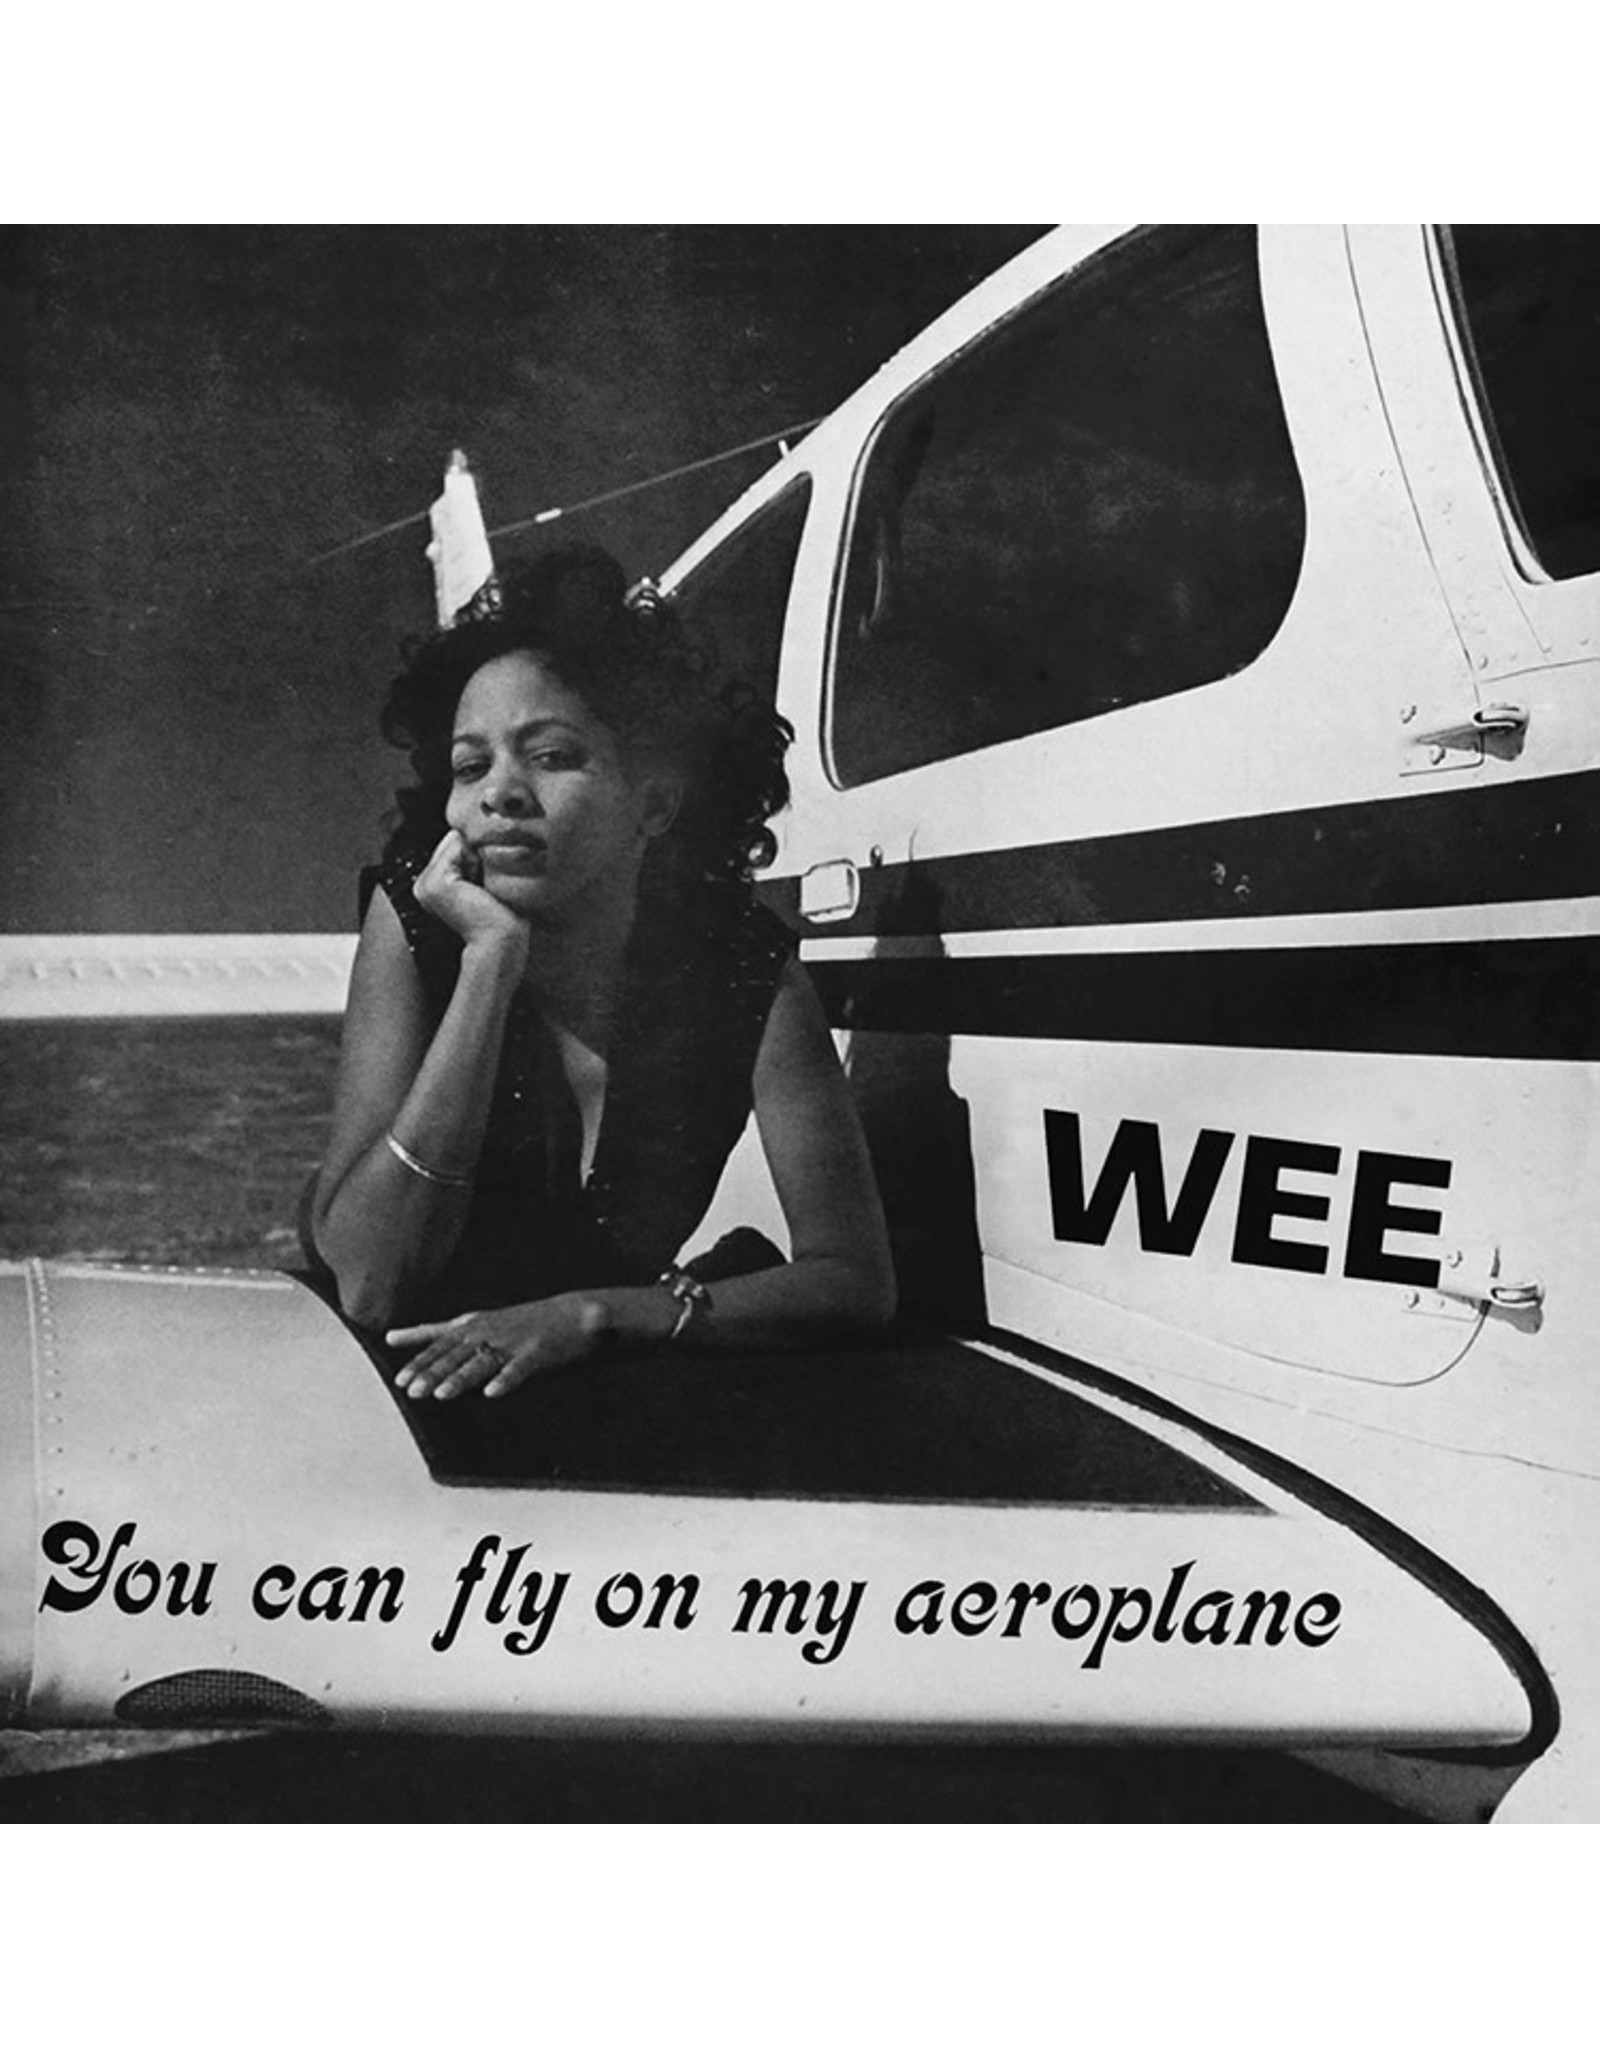 New Vinyl Wee - You Can Fly On My Aeroplane (White) LP